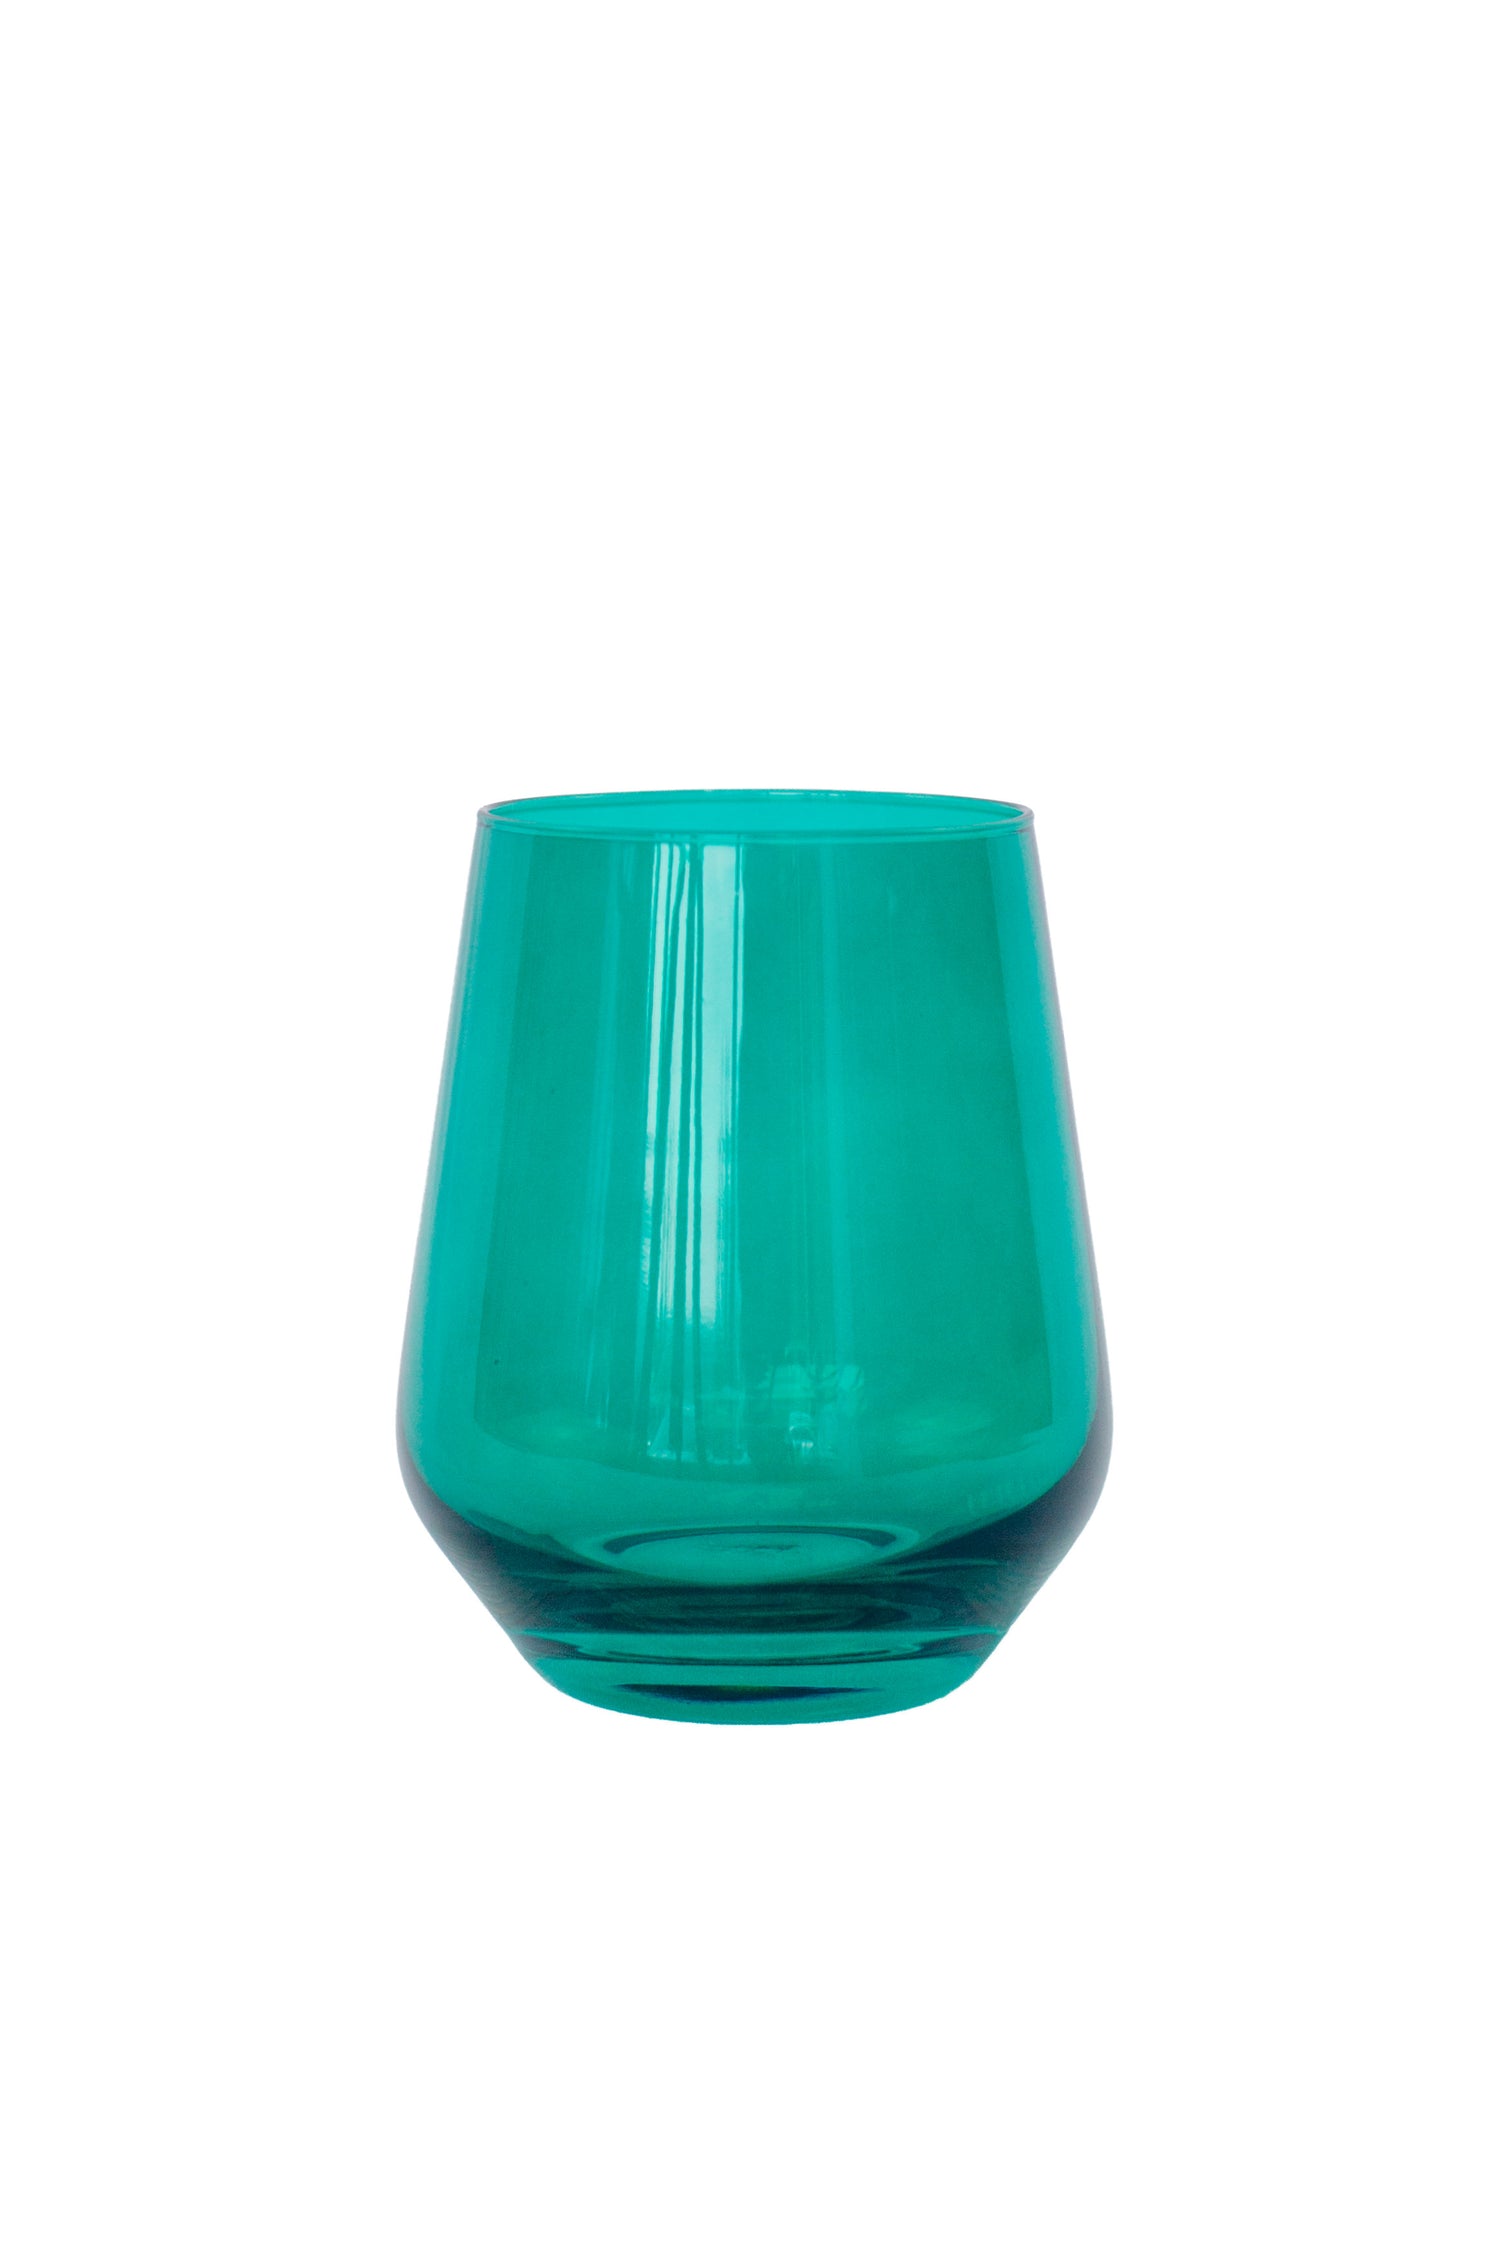 Estelle Colored Wine Stemless - Set of 2 {Emerald Green}